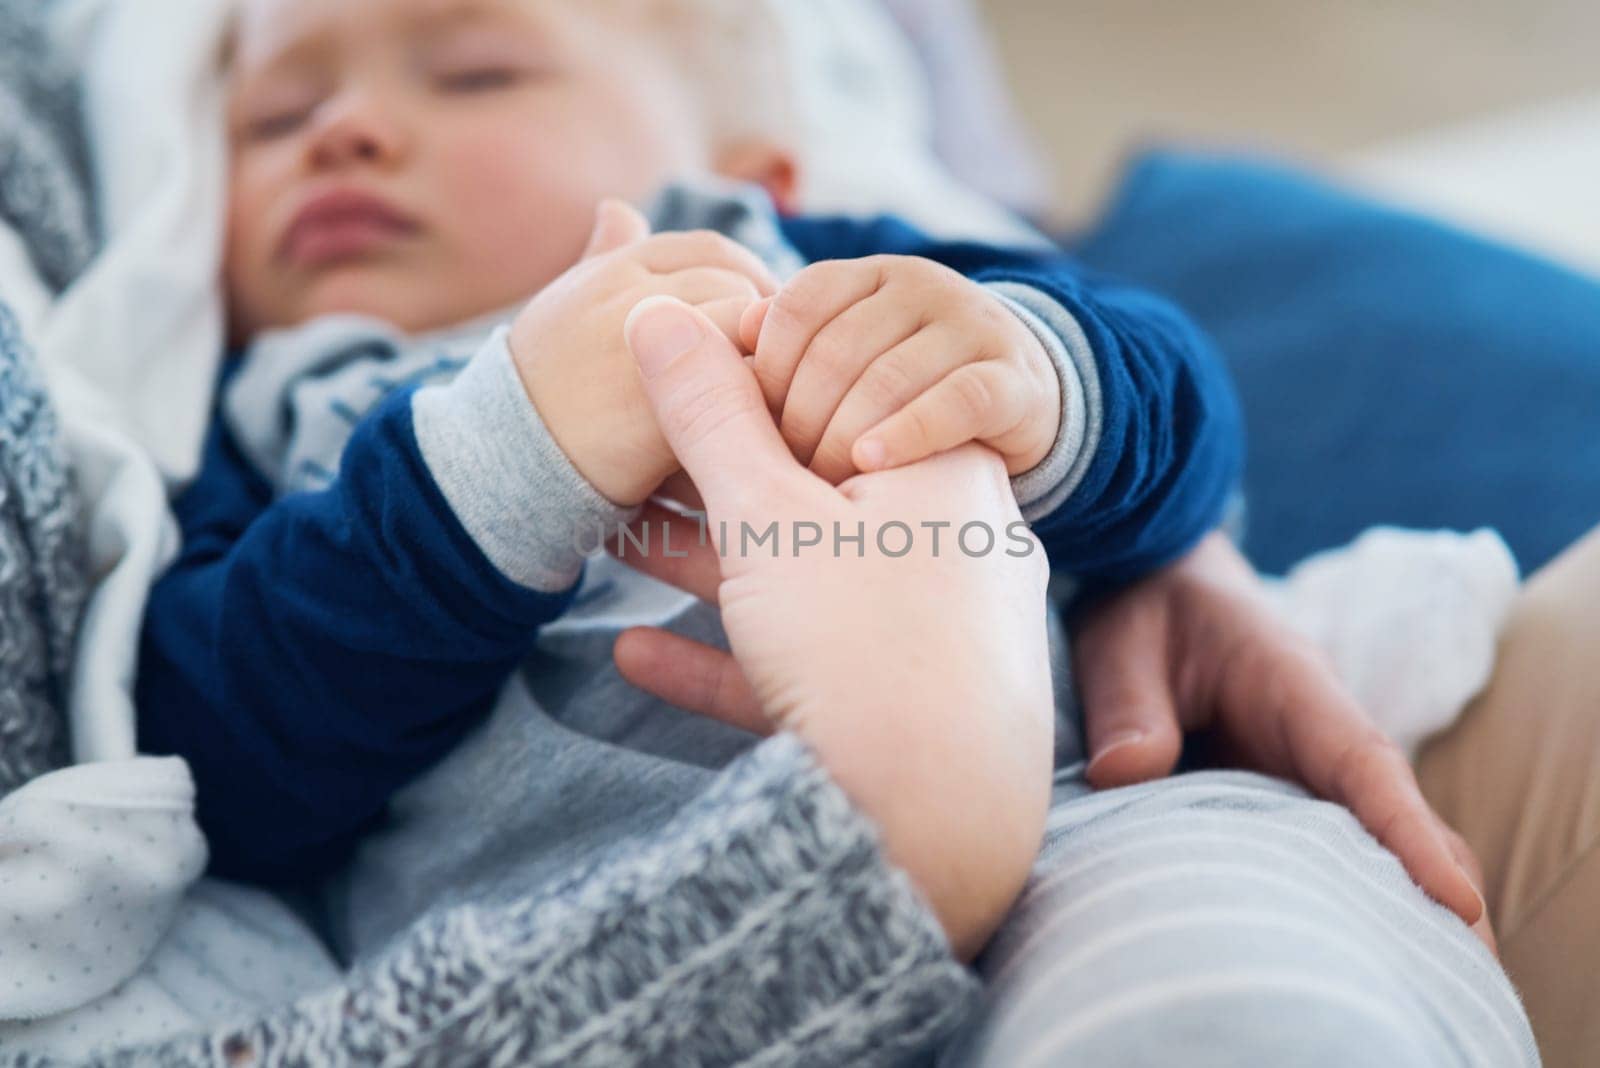 Mommy, baby and sleeping for holding hands in home, security and support in bonding for wellness. Mother, toddler and care for maternity or nap on couch, child development and comfort for single mom.